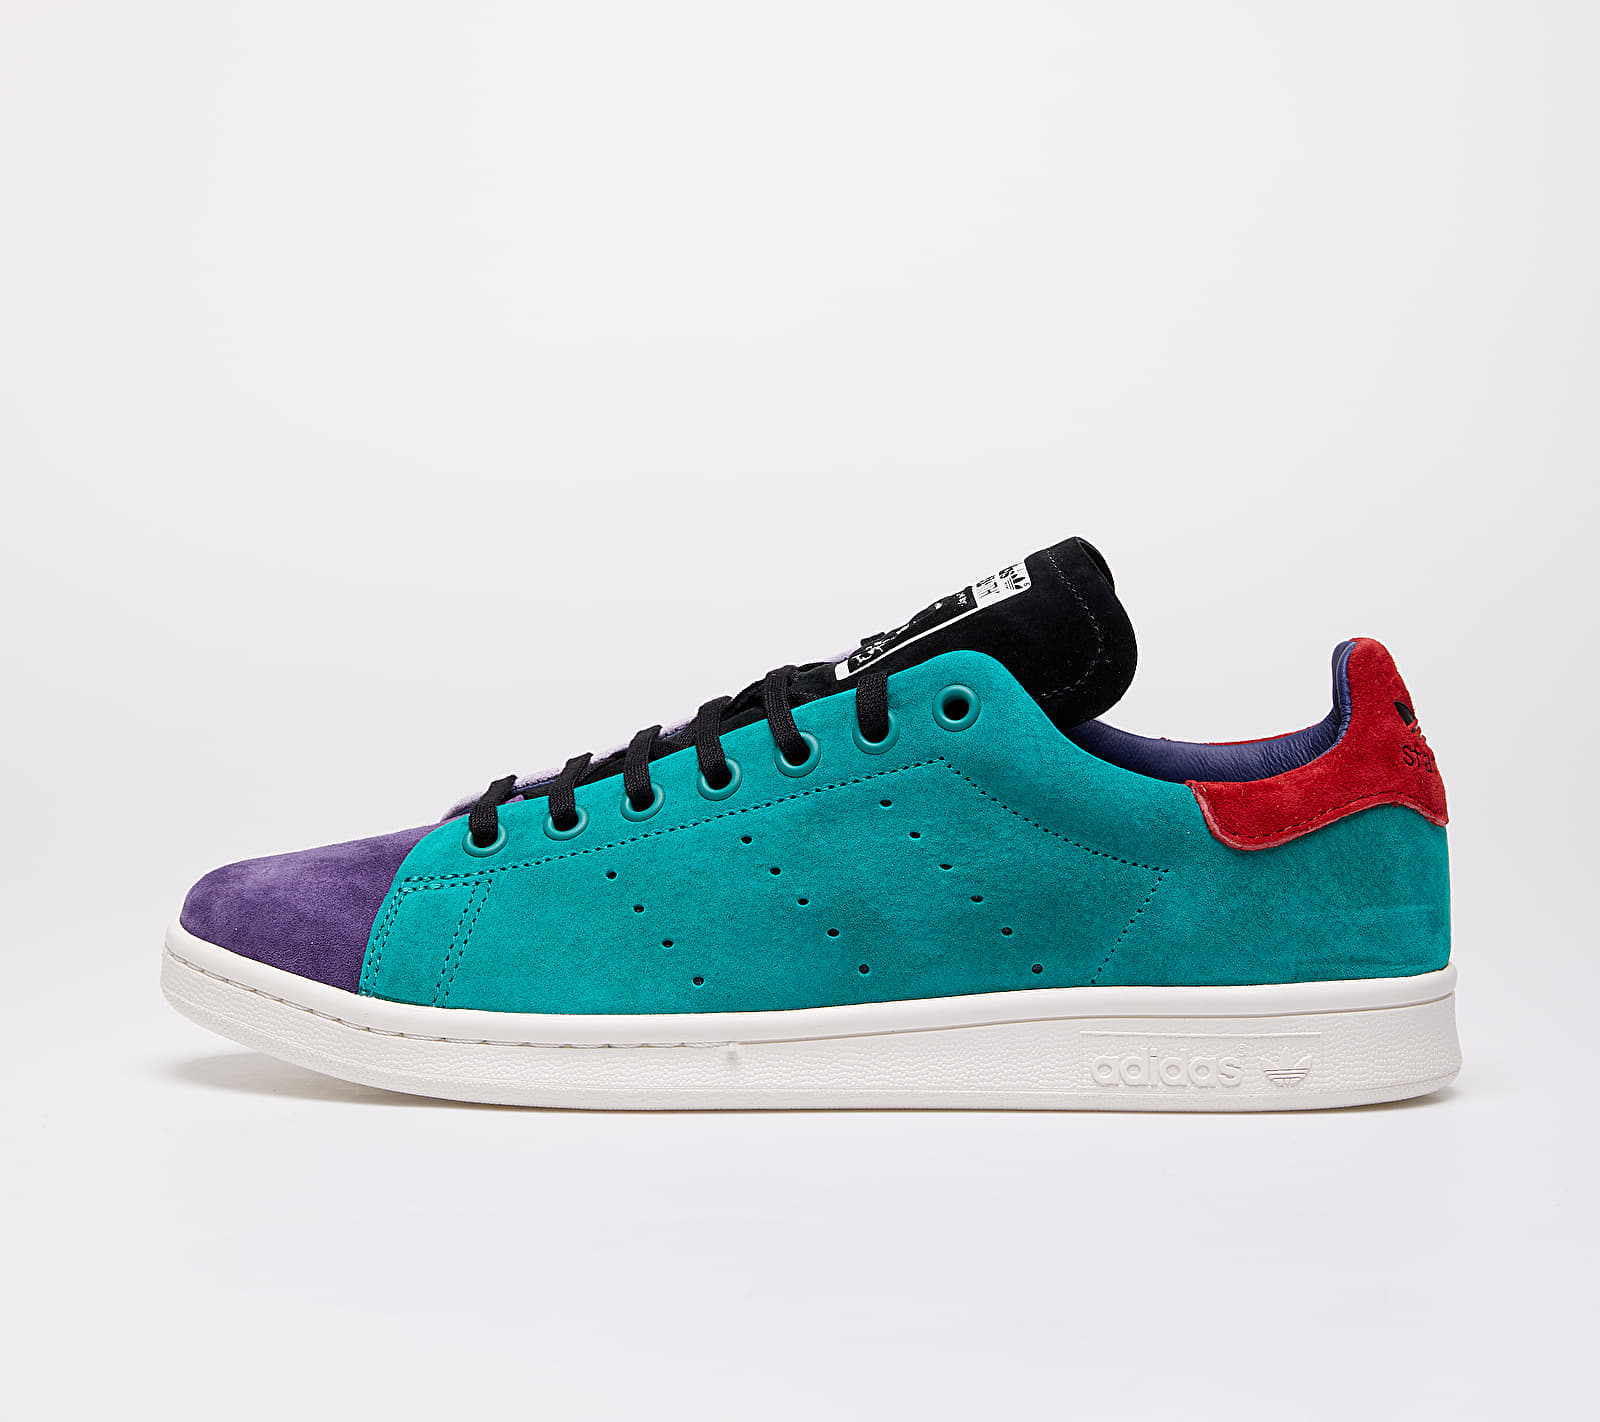 adidas Stan Smith Recon Vapor Pink/ Tactile Steel/ Lust Blue EF4974